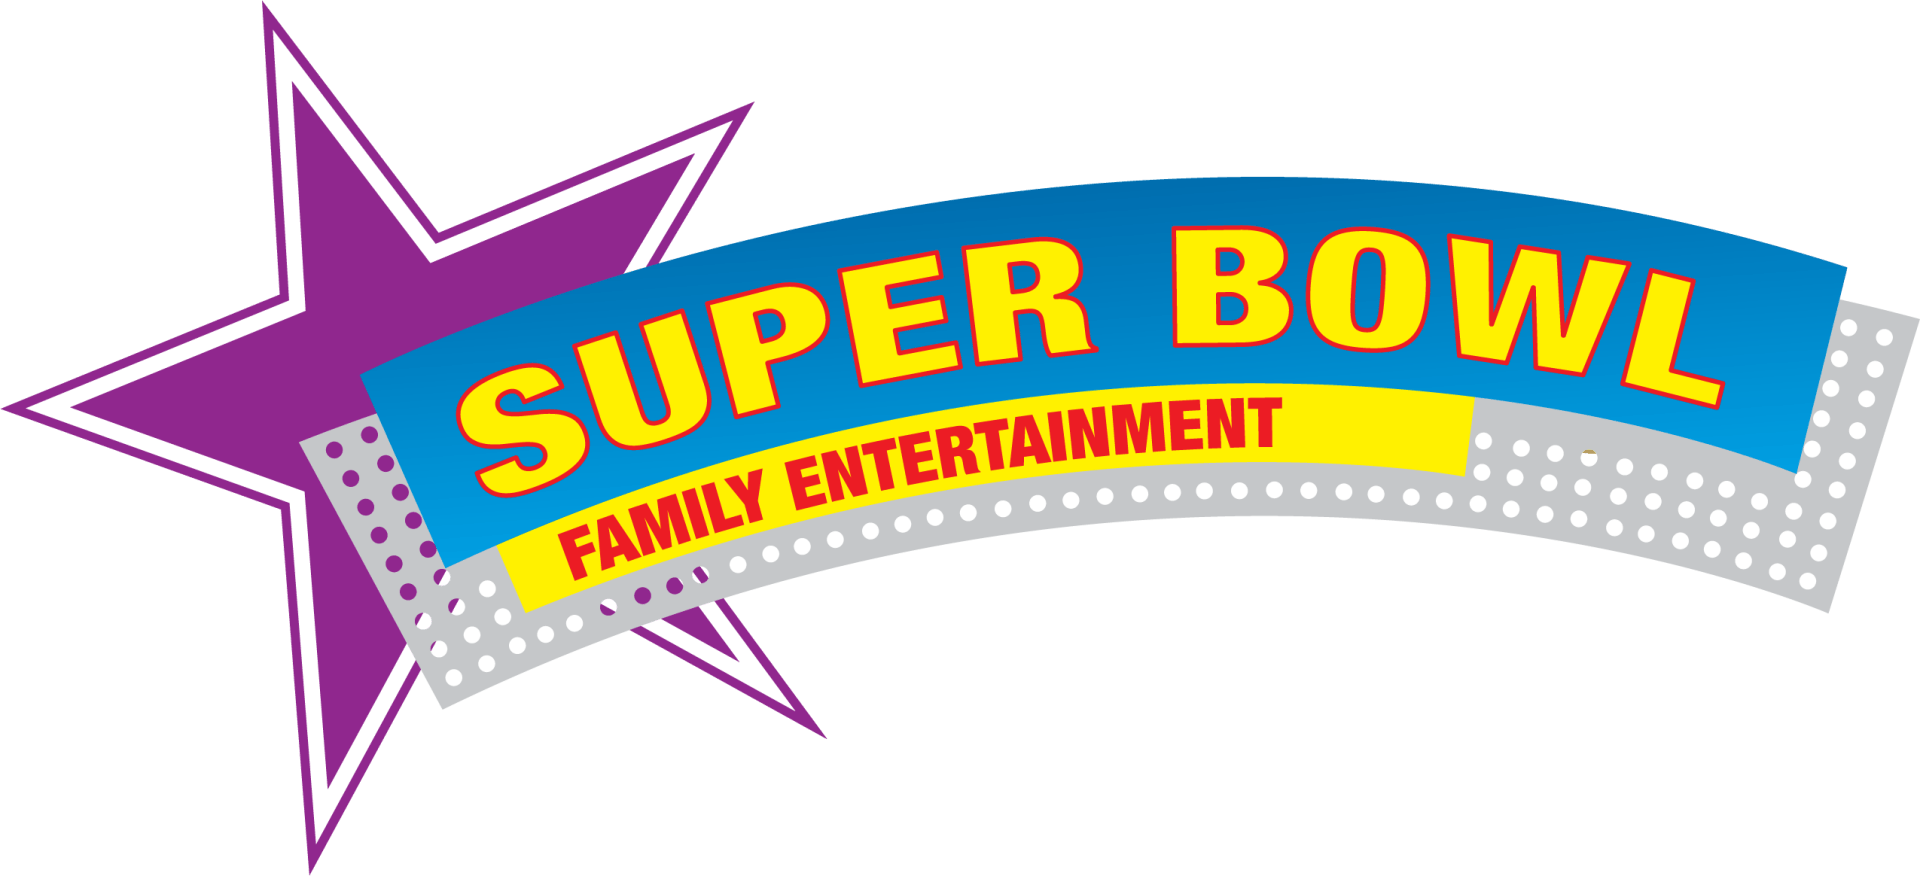 A logo for super bowl family entertainment with a purple star.